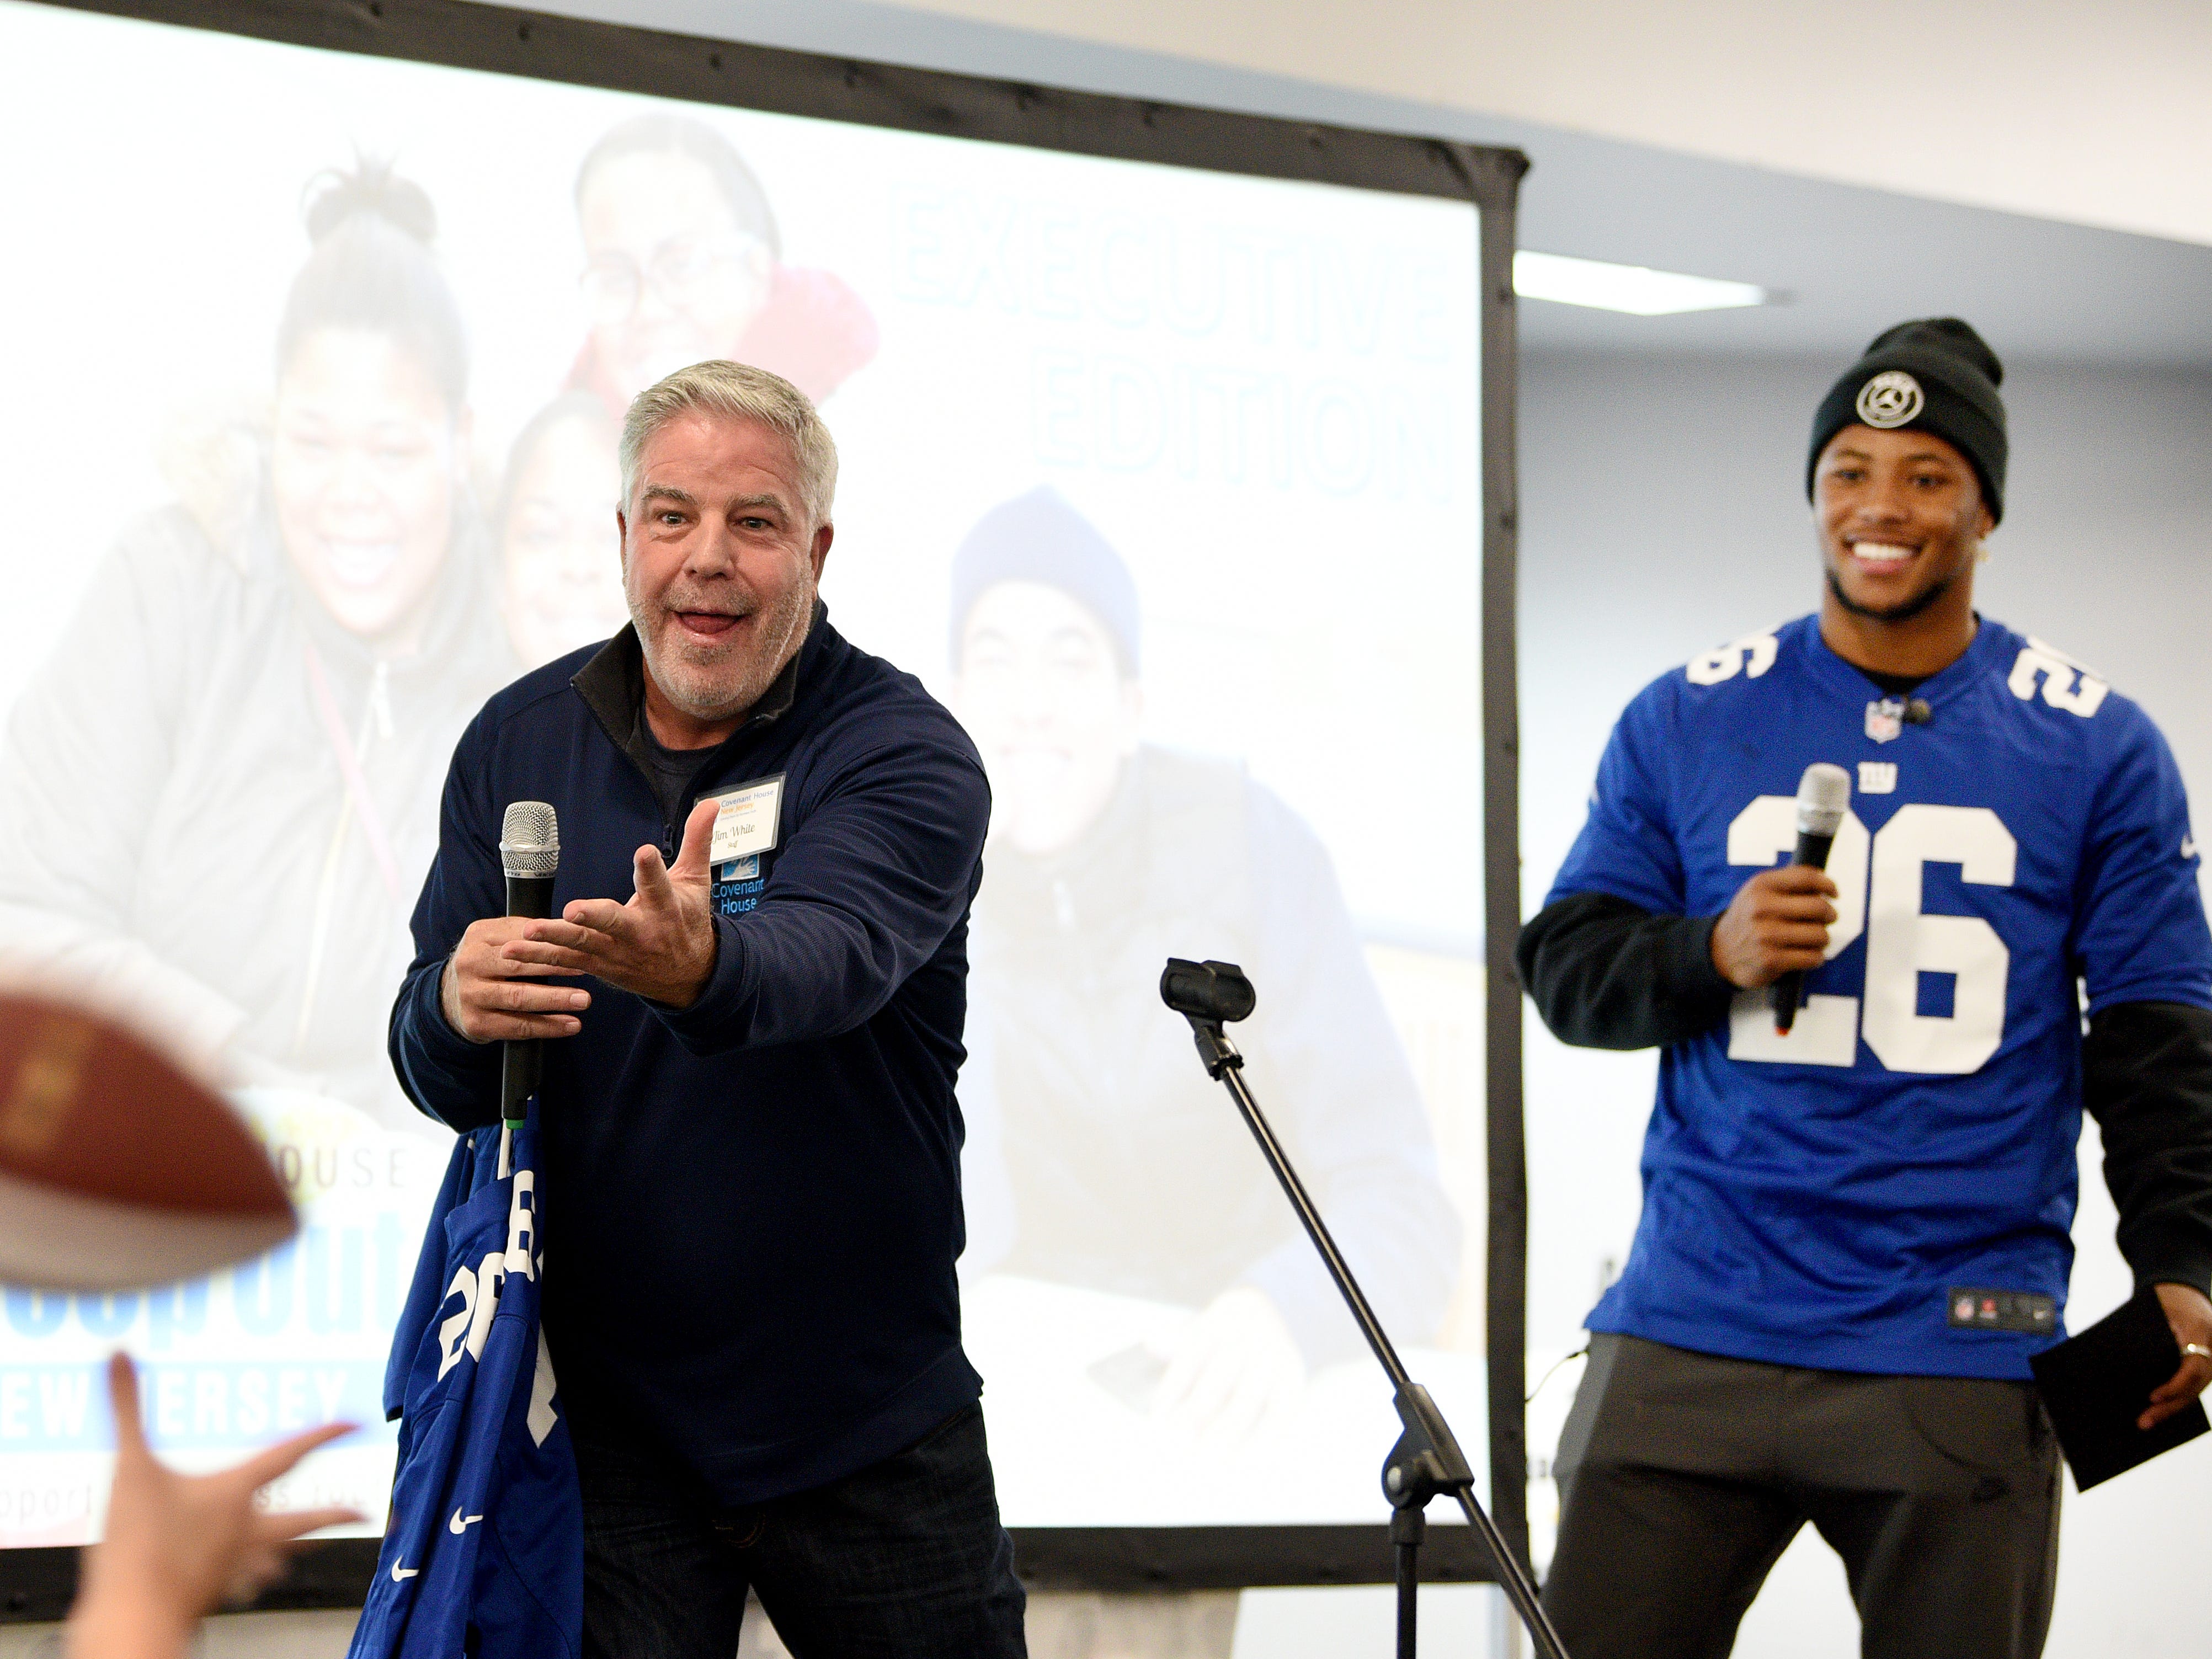 Covenant House holds a Sleep Out Executive Edition in Newark on Thursday November 21, 2019. Jim White tosses a football while Saquon Barkley a player with the Giants and Sleep Out: Executive Edition Chairman has a laugh. 